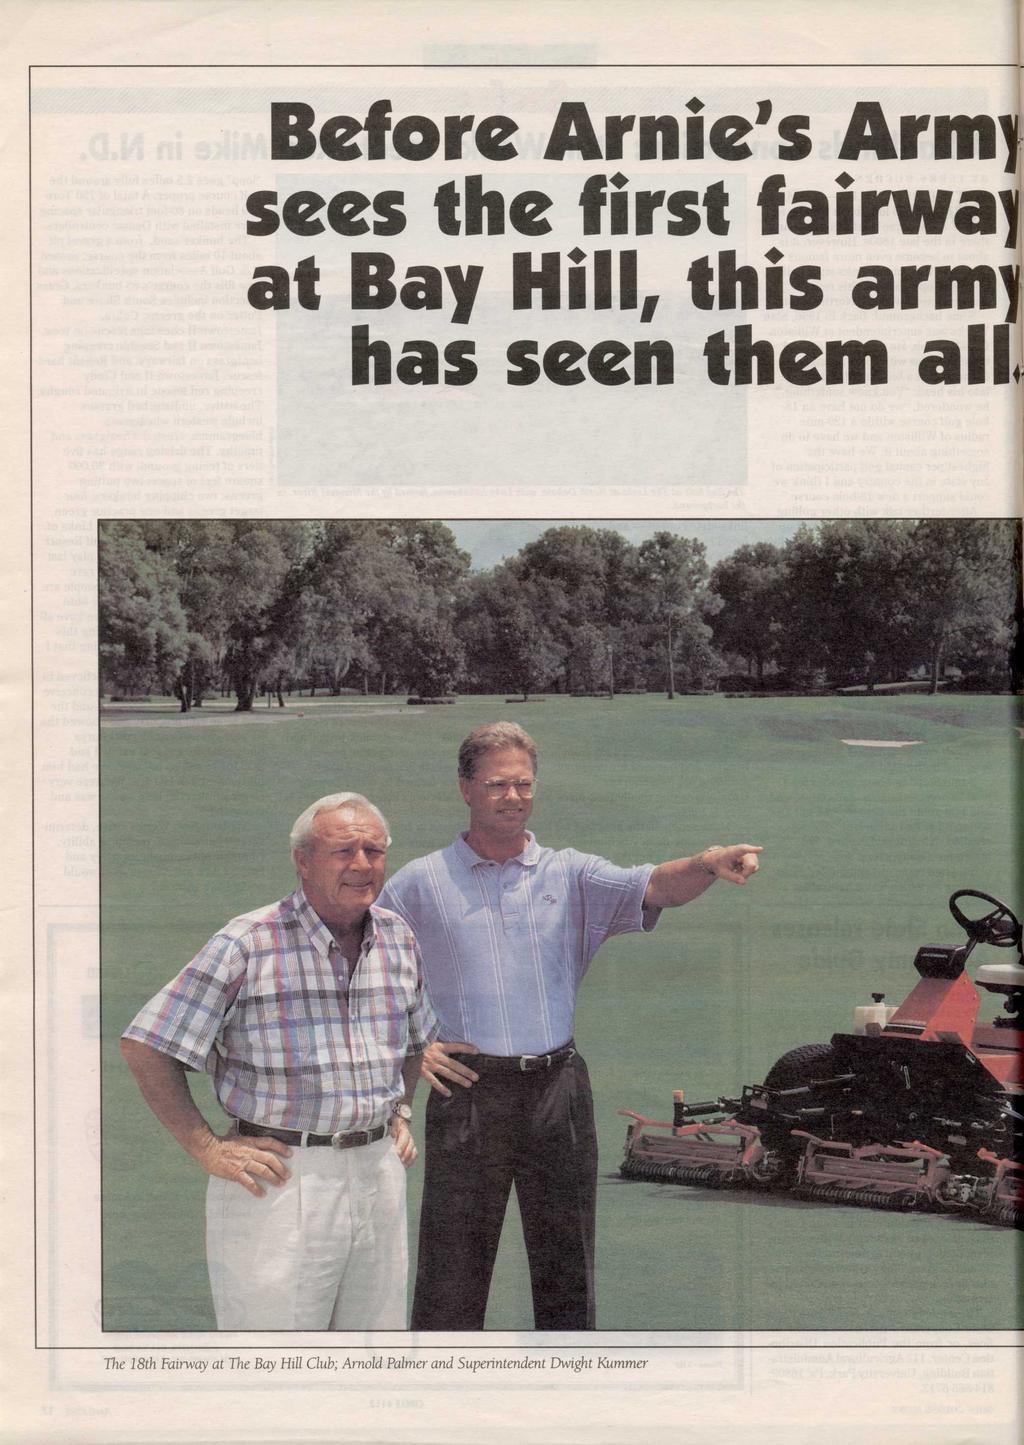 Before Arnie's Army sees the first fairway at Bay Hill, this army has seen them all